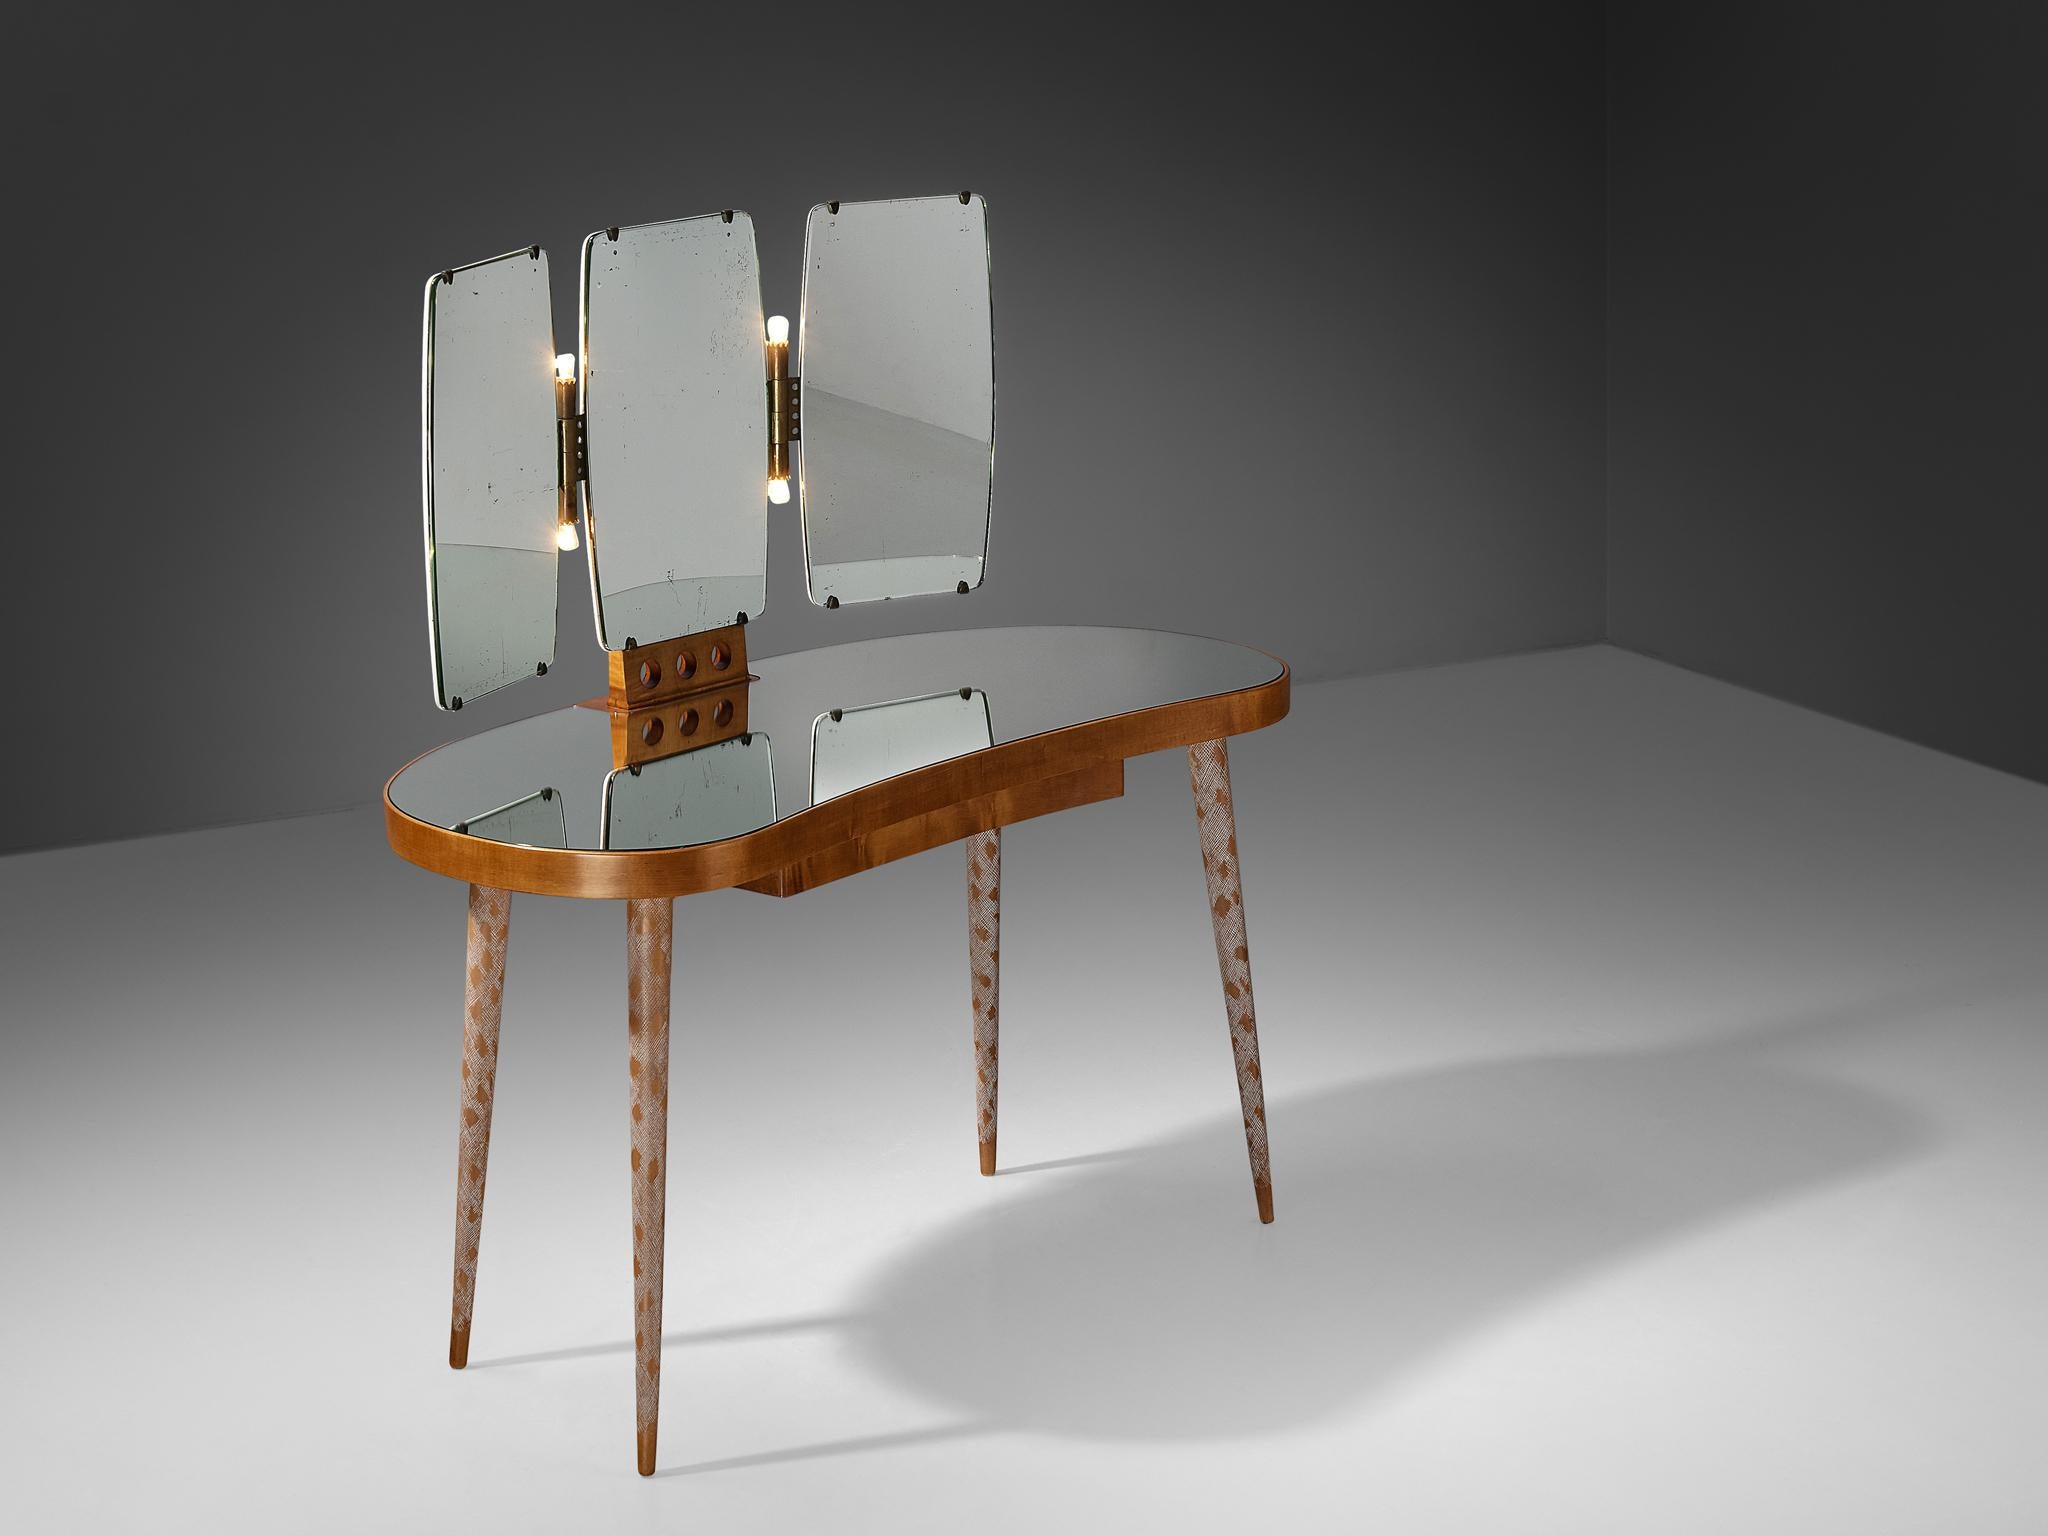 Osvaldo Borsani for Arredamenti Borsani Varedo, dressing table, model '6142', maple, brass, mirrored glass, lacquered wood, Italy, 1943

An exquisite and truly exceptional vanity table designed by the Italian Osvaldo Borsani, dating back to around